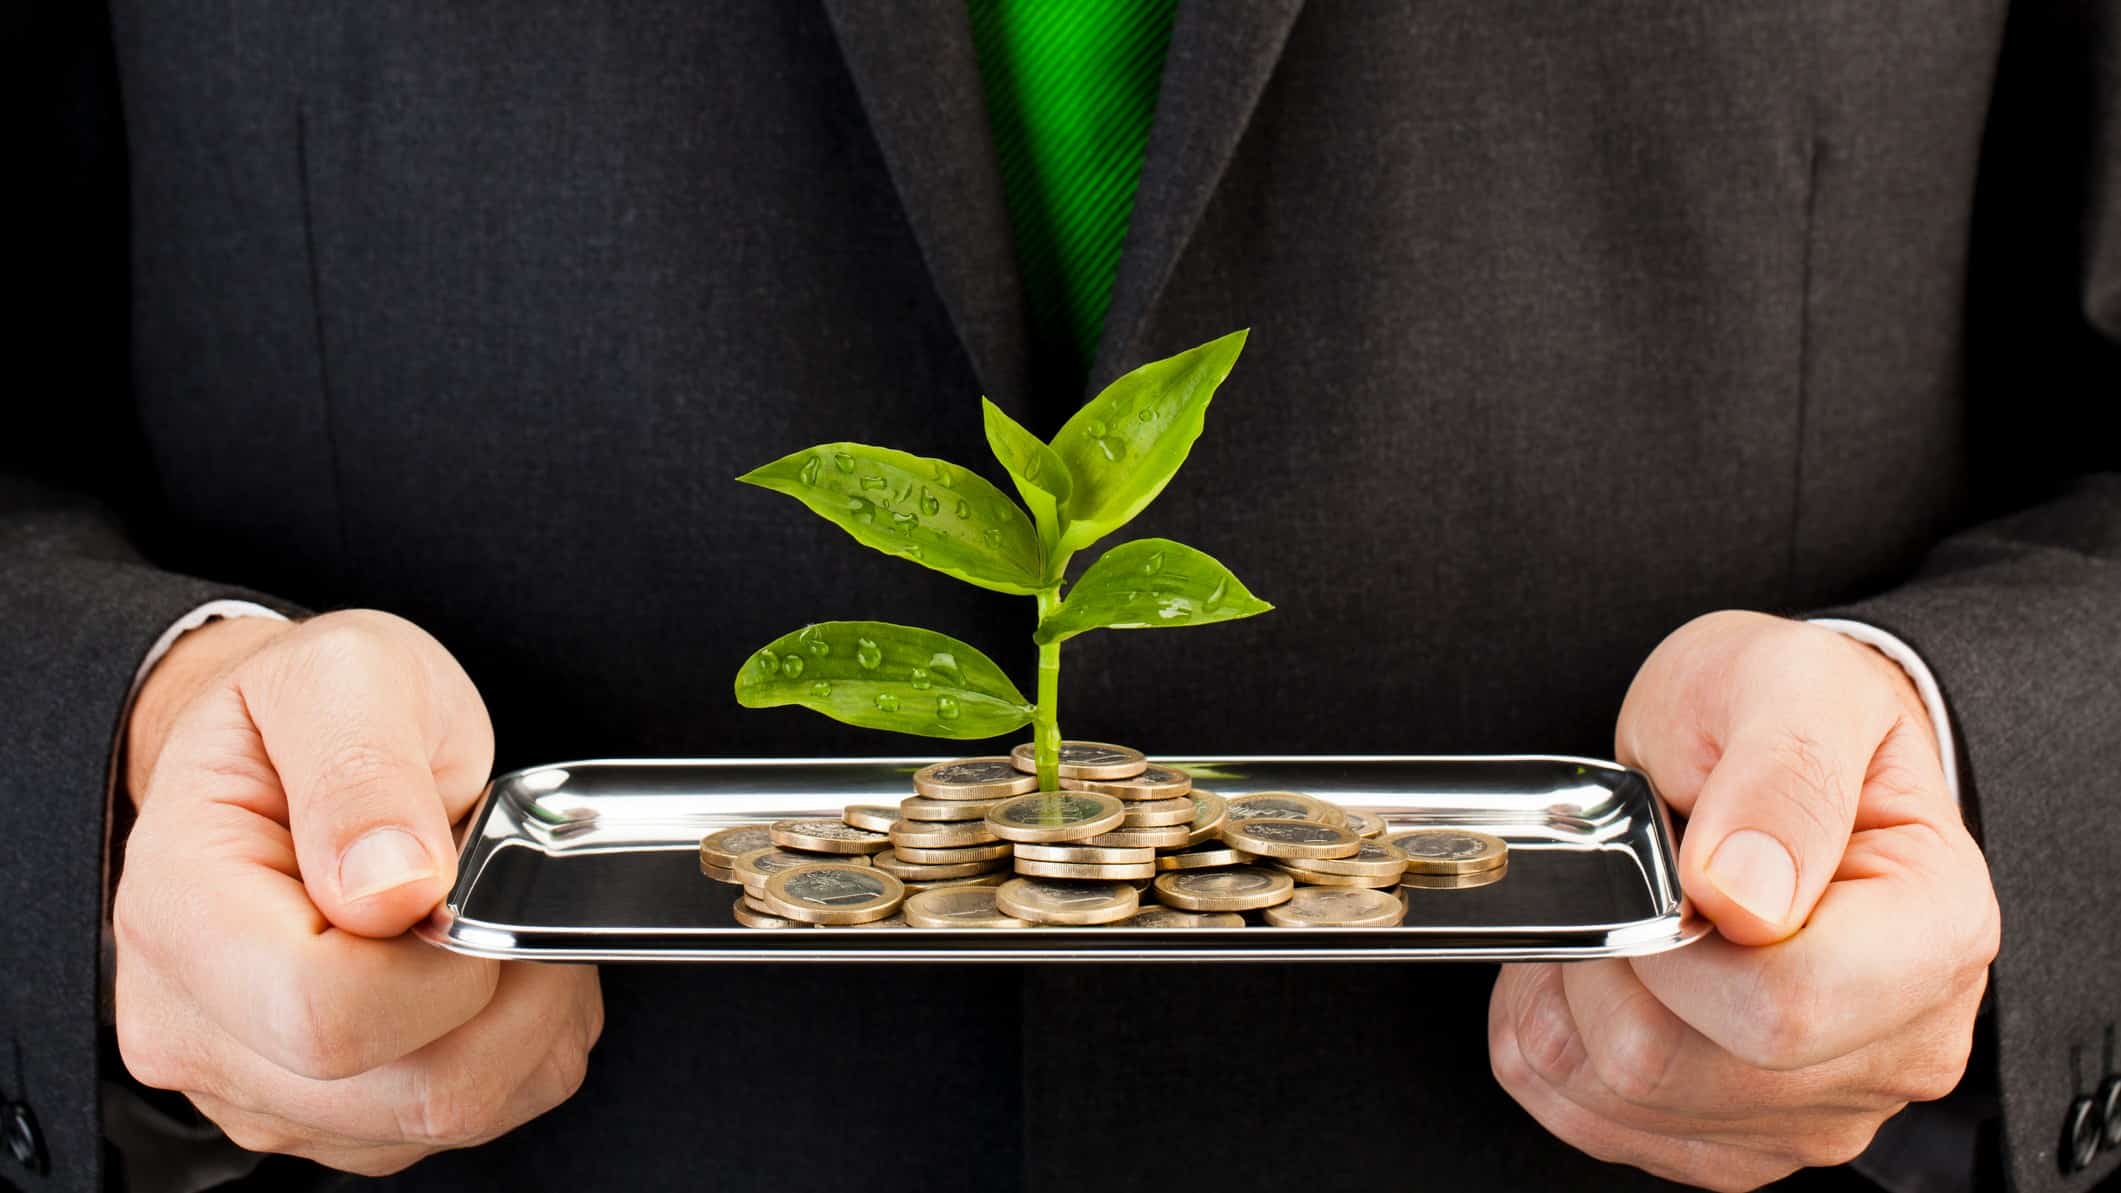 Close-up photo of man's hands holding silver platter with coins and young plant growing out of pile of money